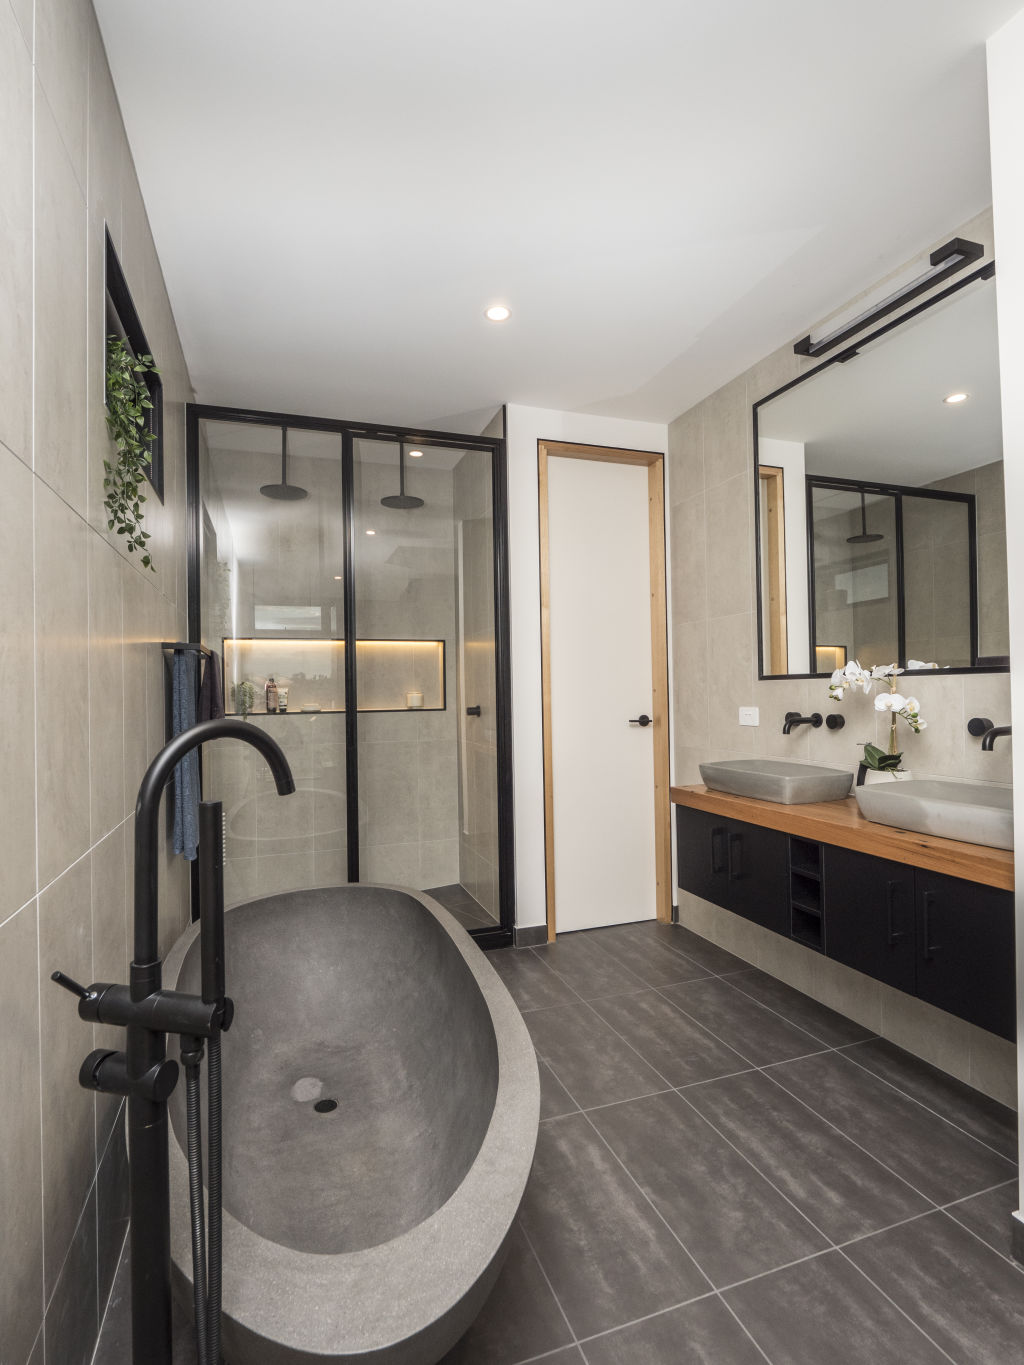 One of the bathrooms in the shipping container home. Photo: Serana Hunt-Hughes